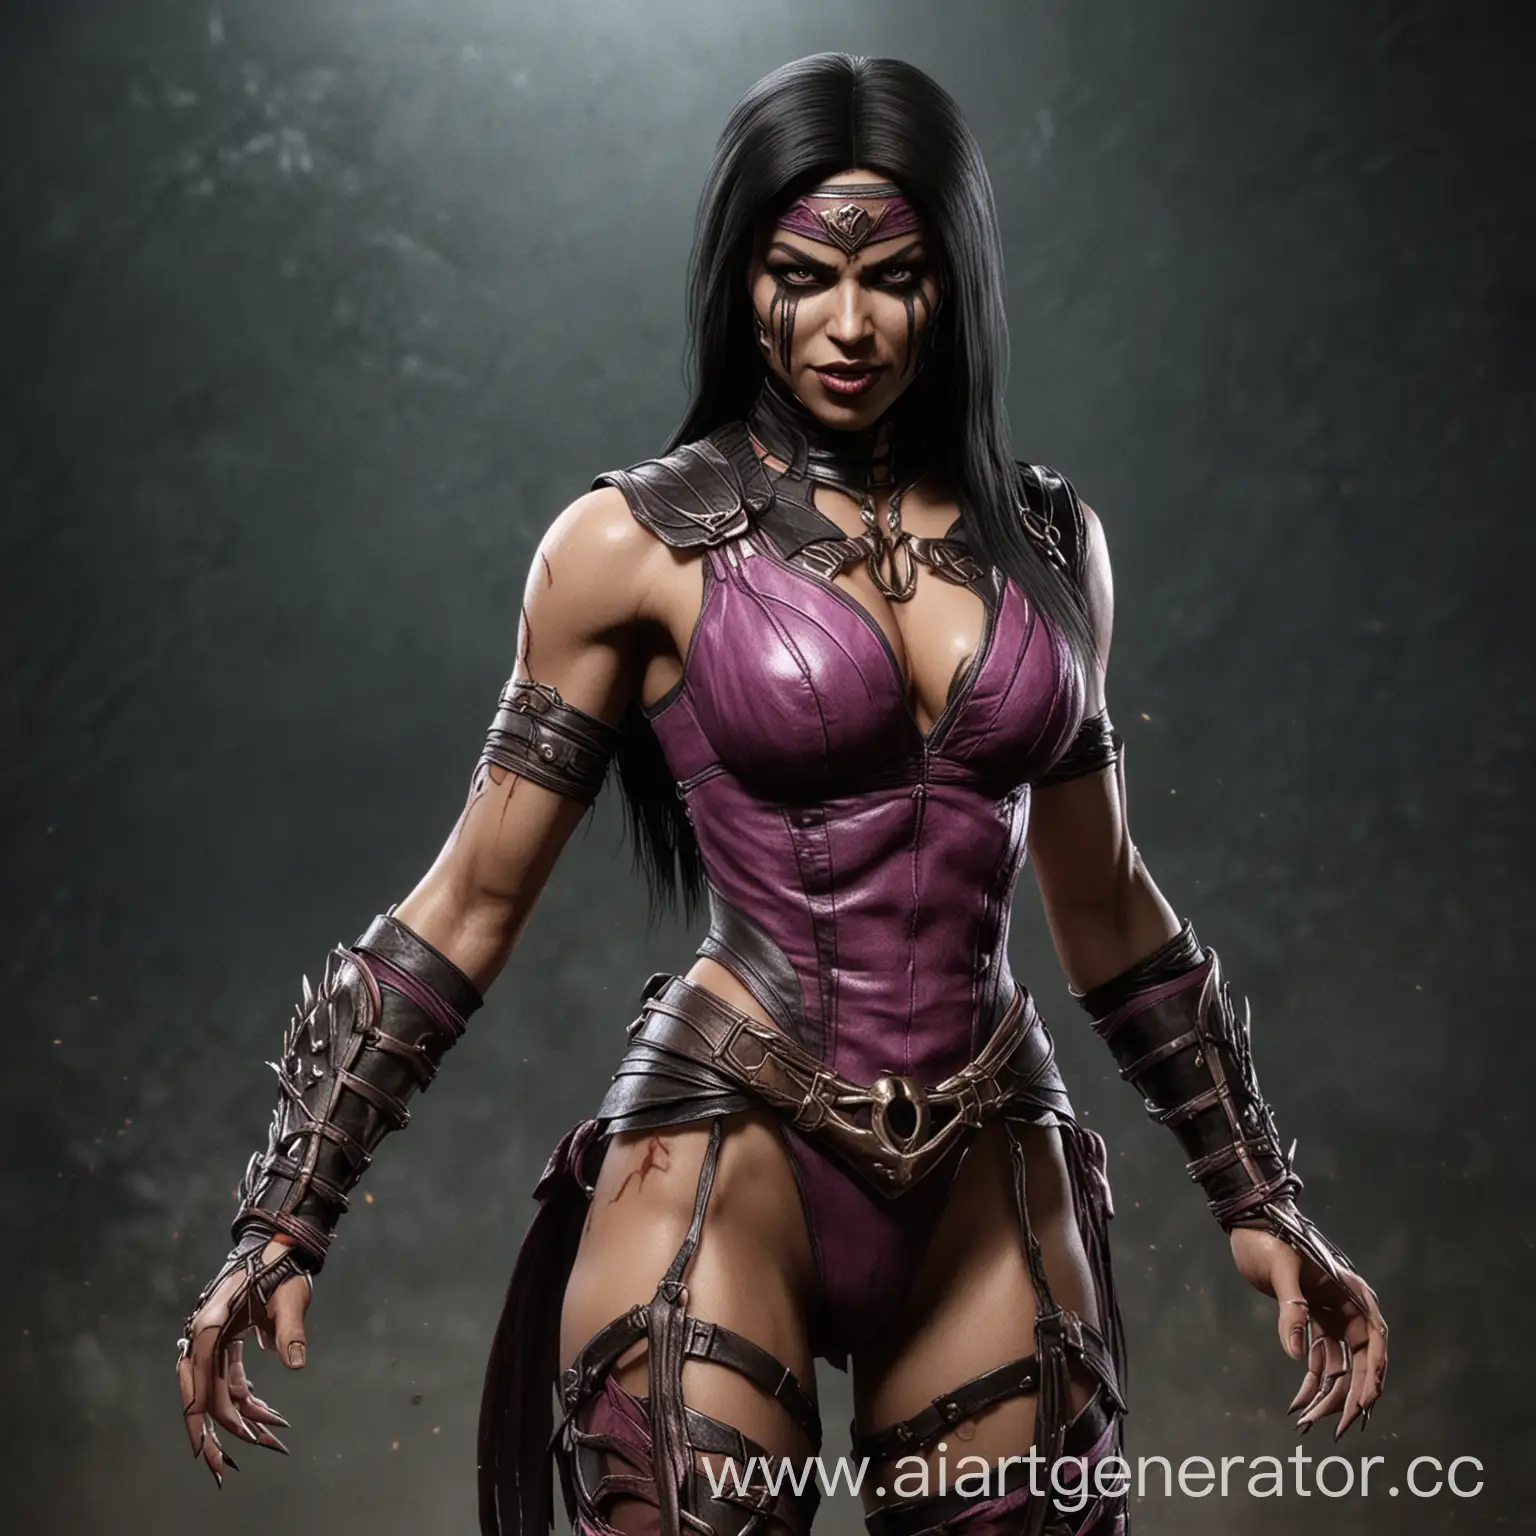 Sultry-and-Fierce-Warrior-Princess-MKX-Mileena-Hot-Cosplay